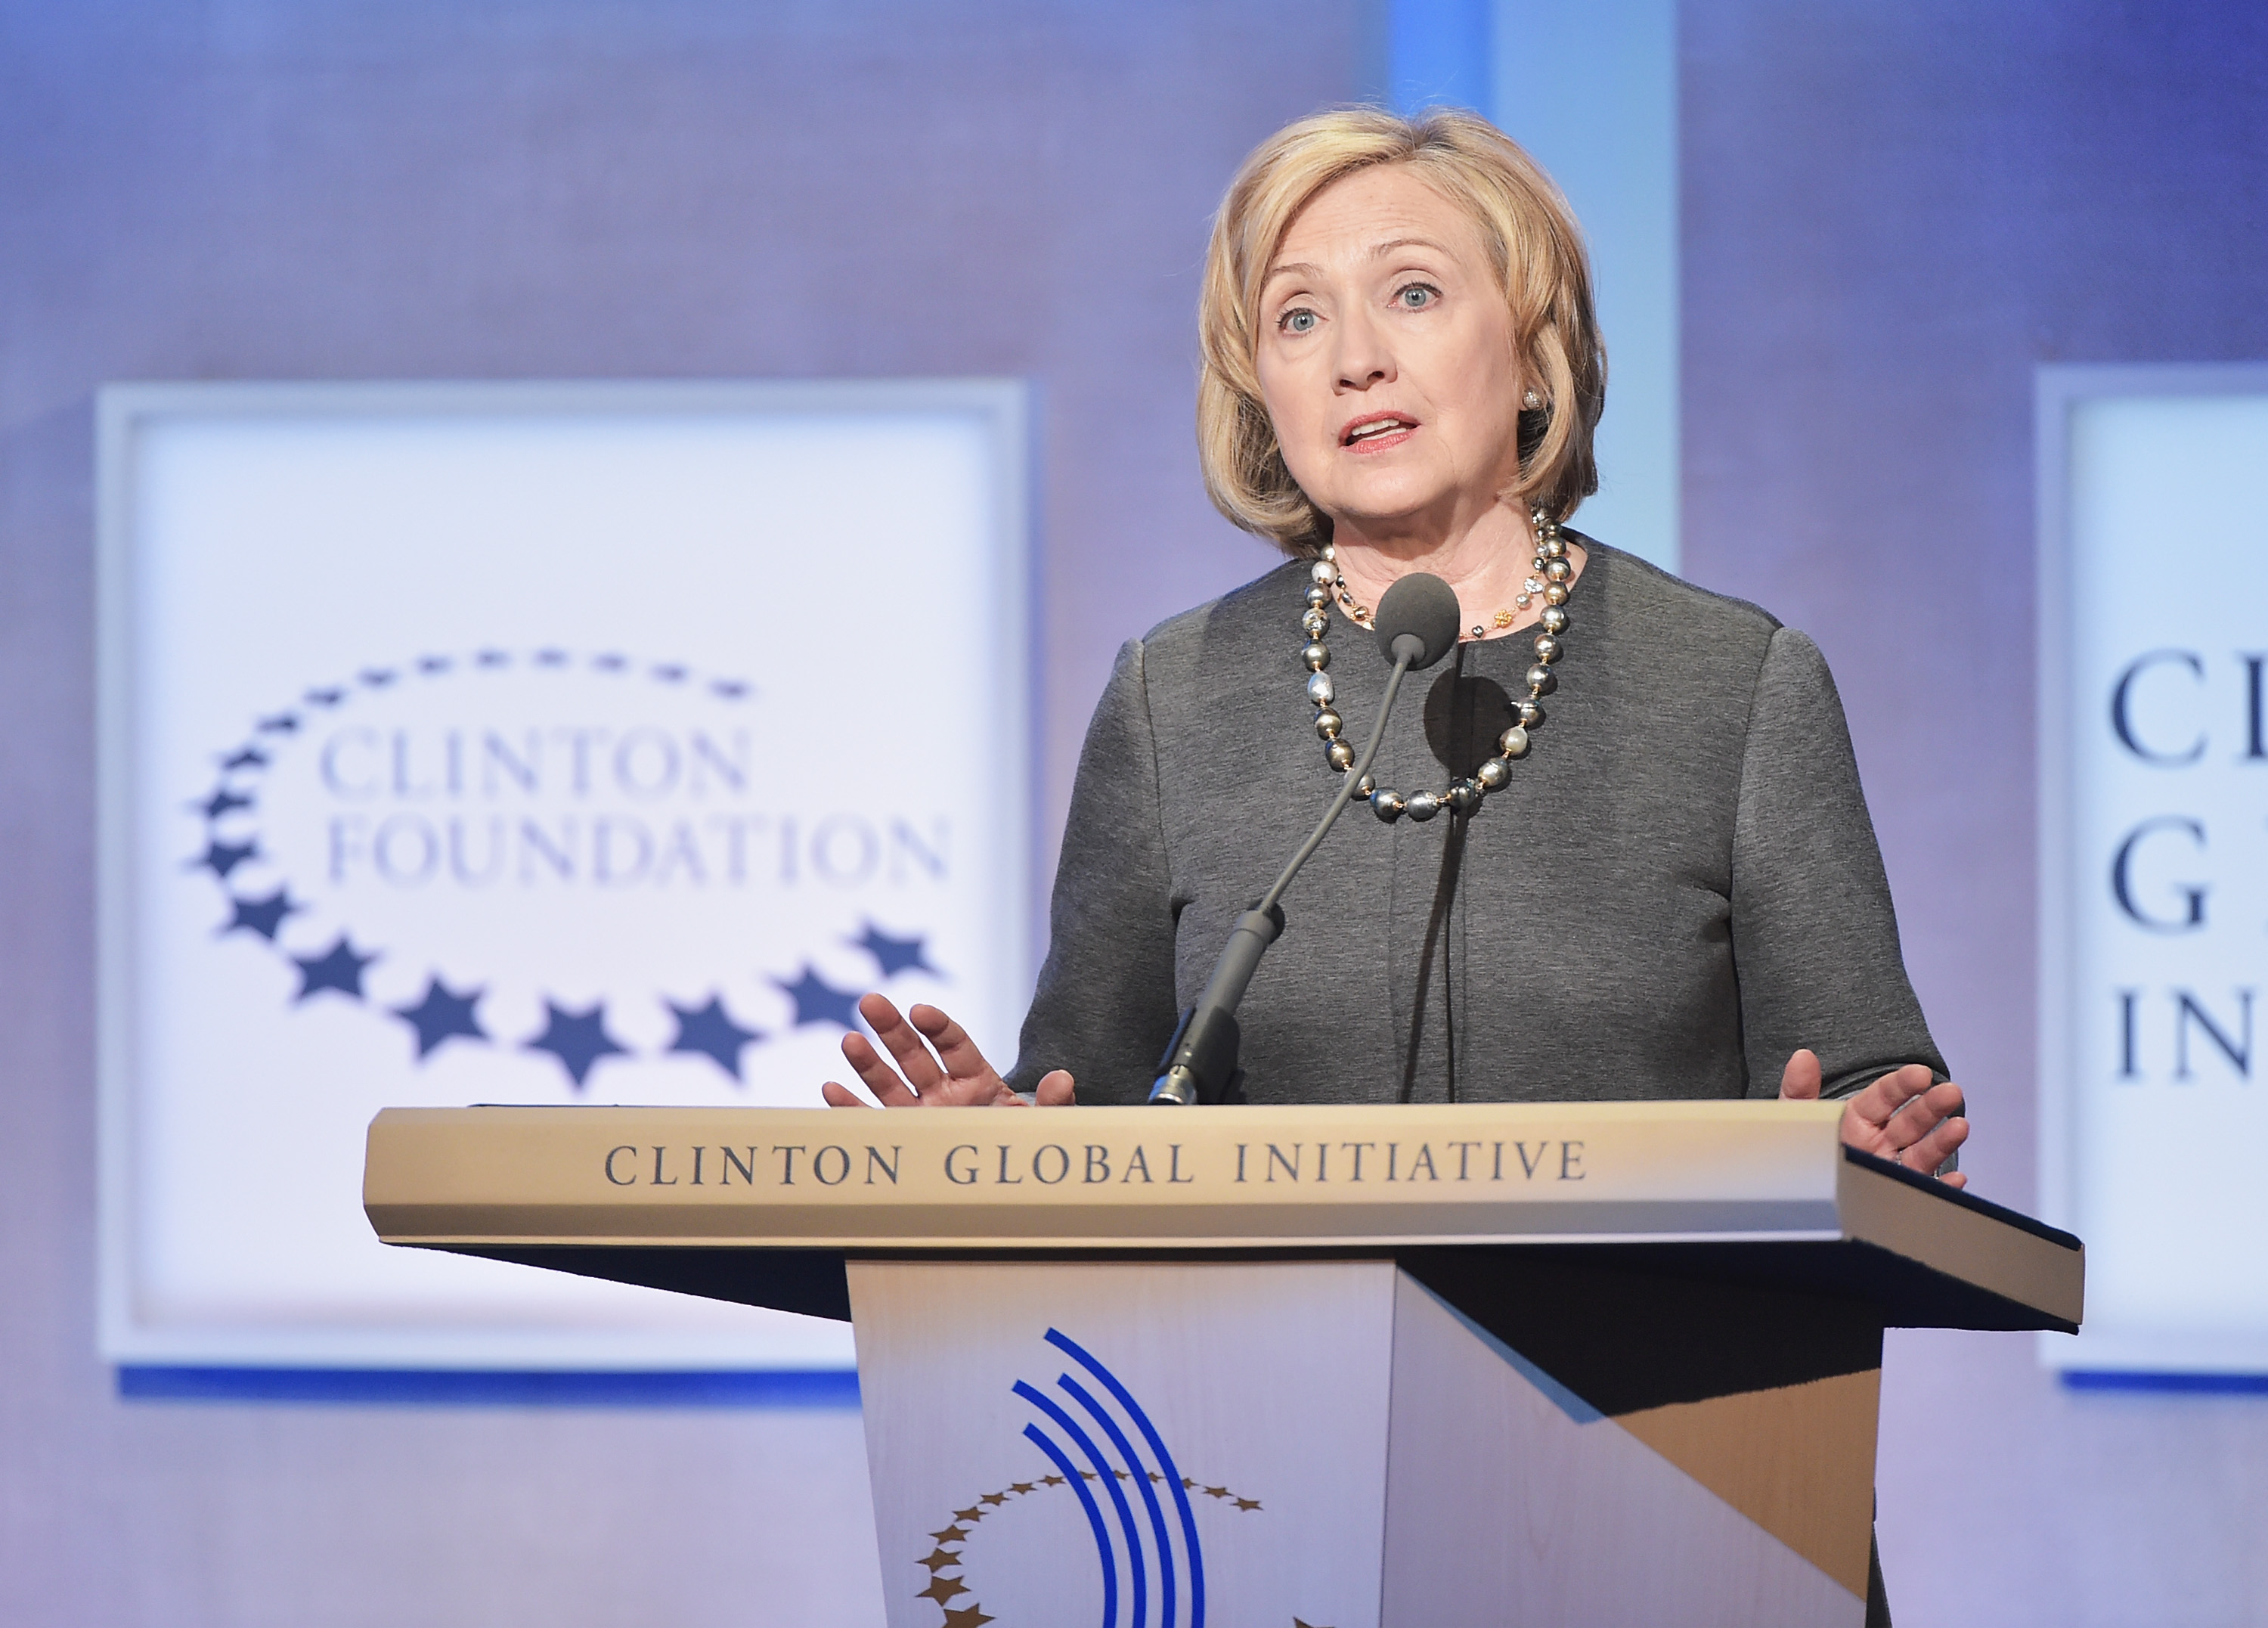 Former US Secretary of State Hillary Clinton  addresses the audience during the Opening Plenary Session: Reimagining Impact for the Clinton Global Initiative on September 22, 2014 at the Sheraton New York Hotel & Towers in New York City. (Michael Loccisano—Getty Images)